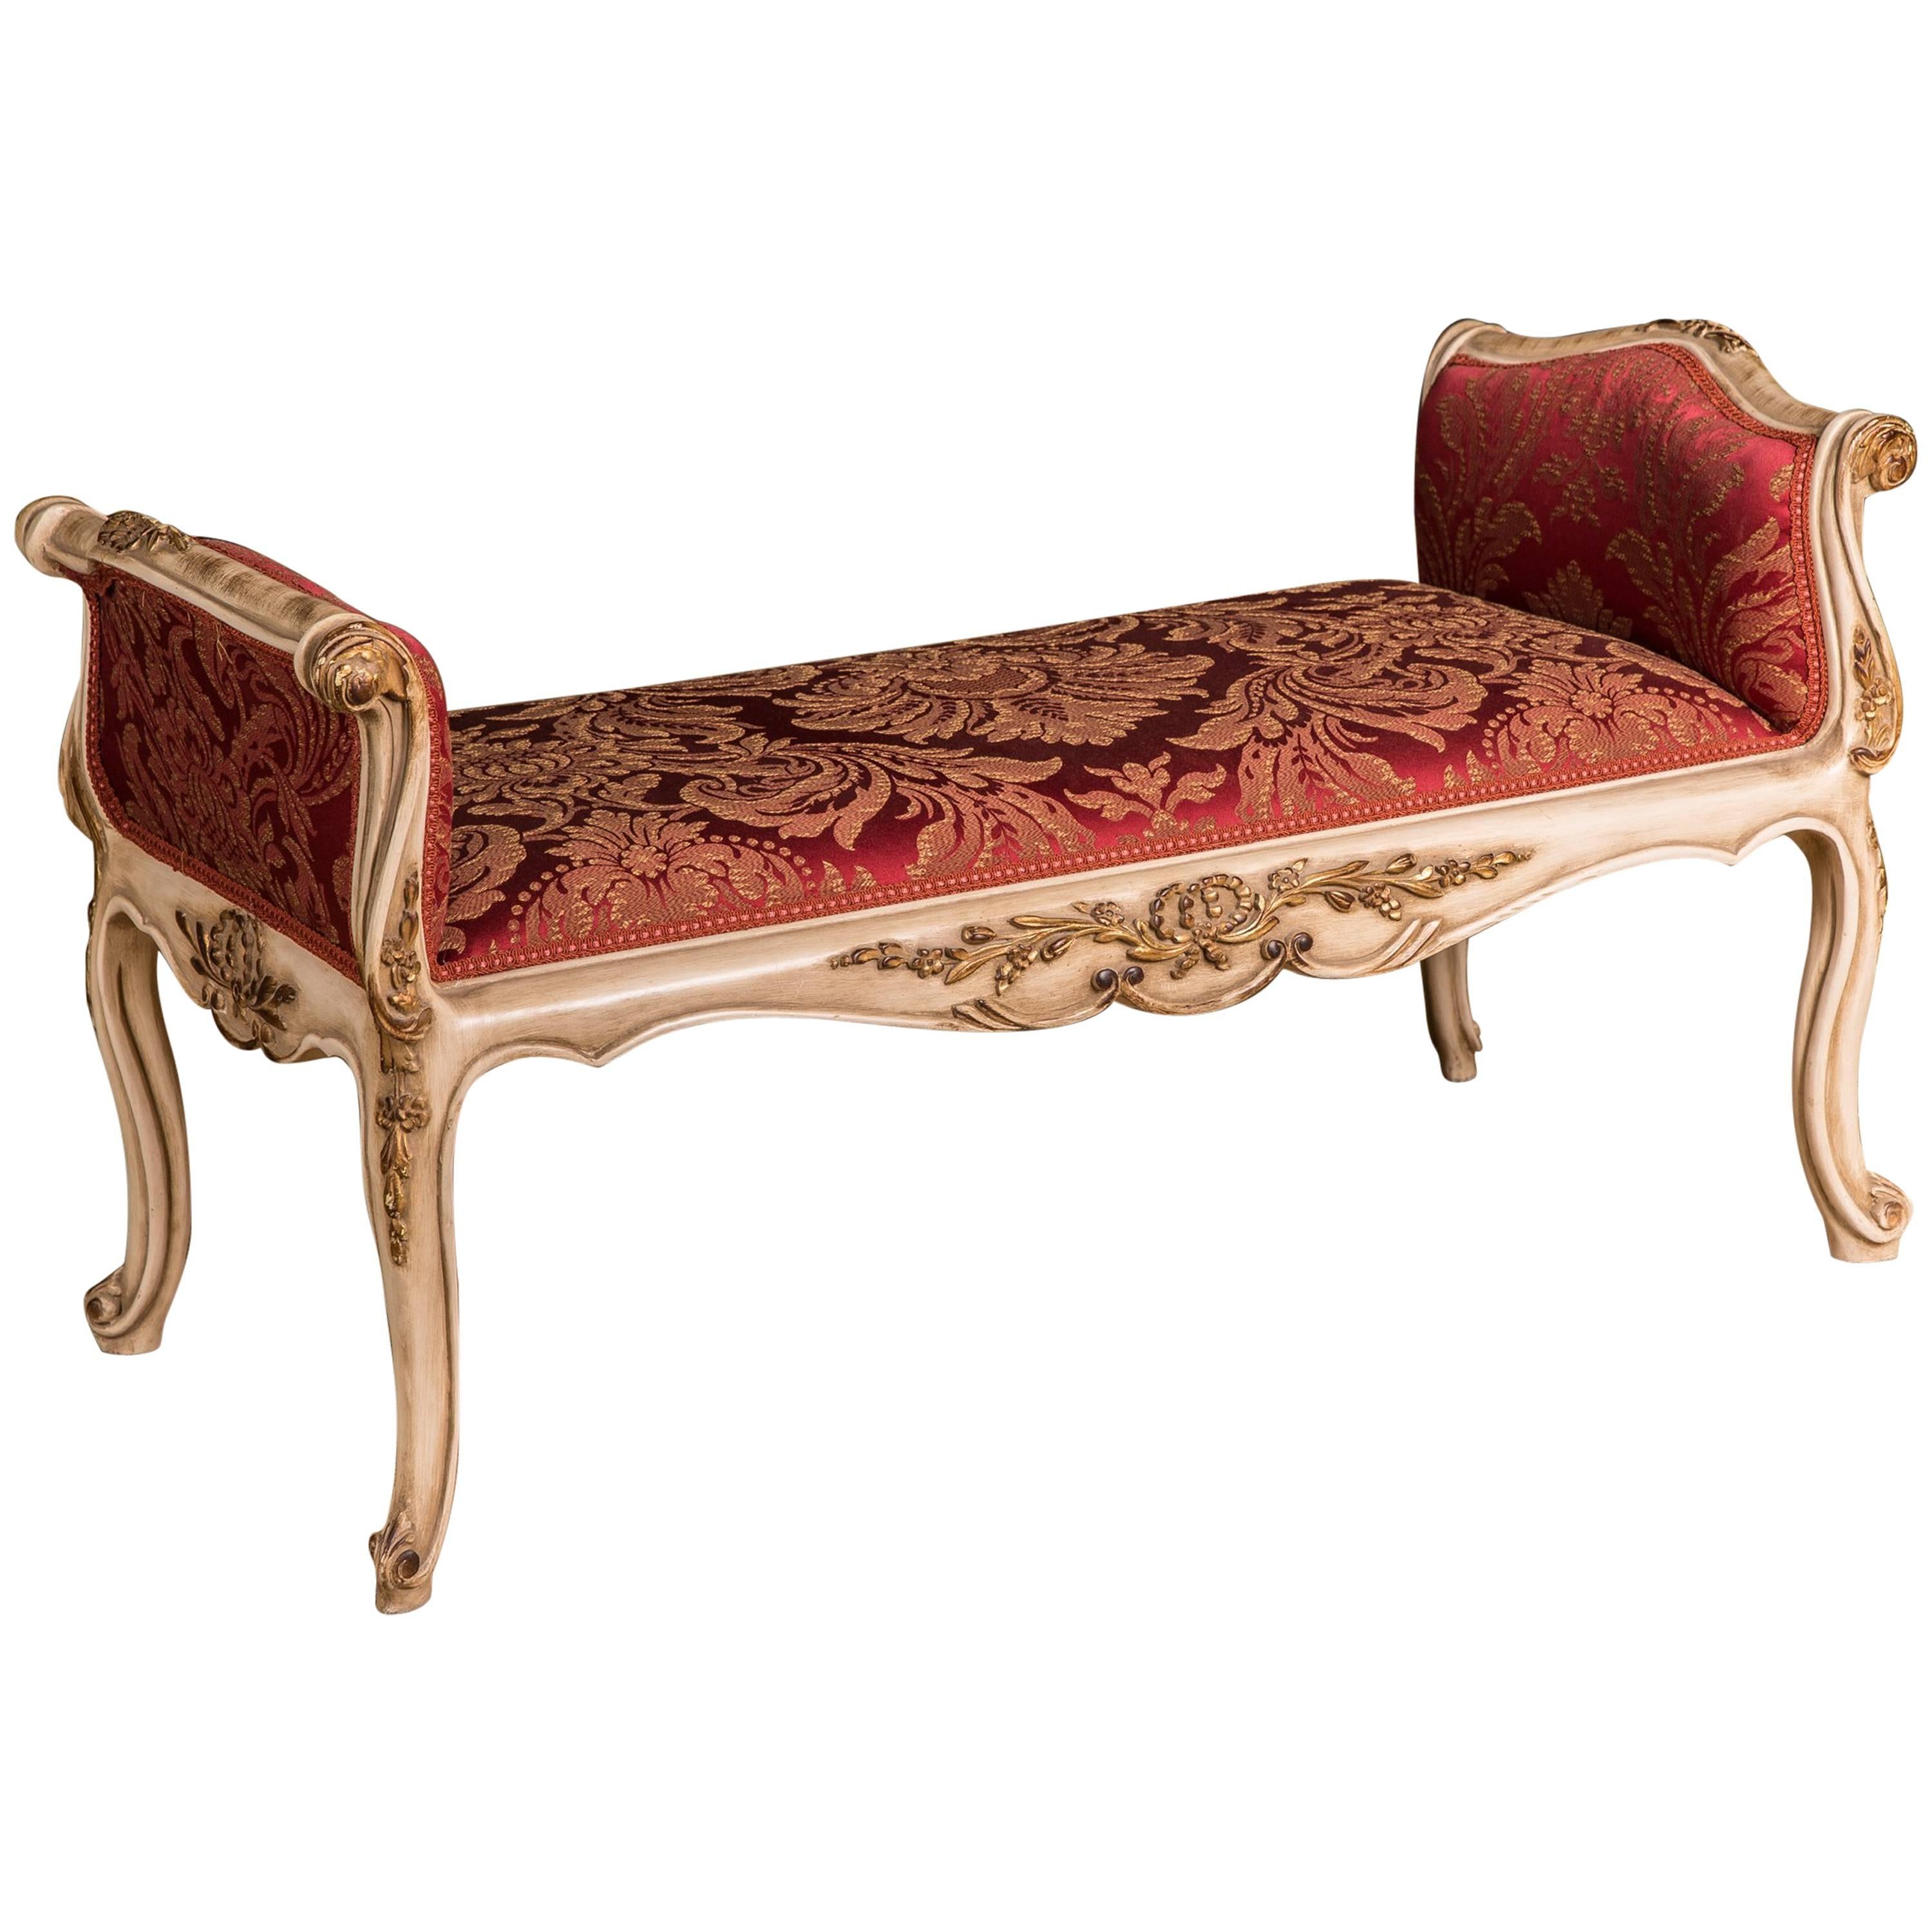 Dainty French Gondola Stool in Louis Quinze Style